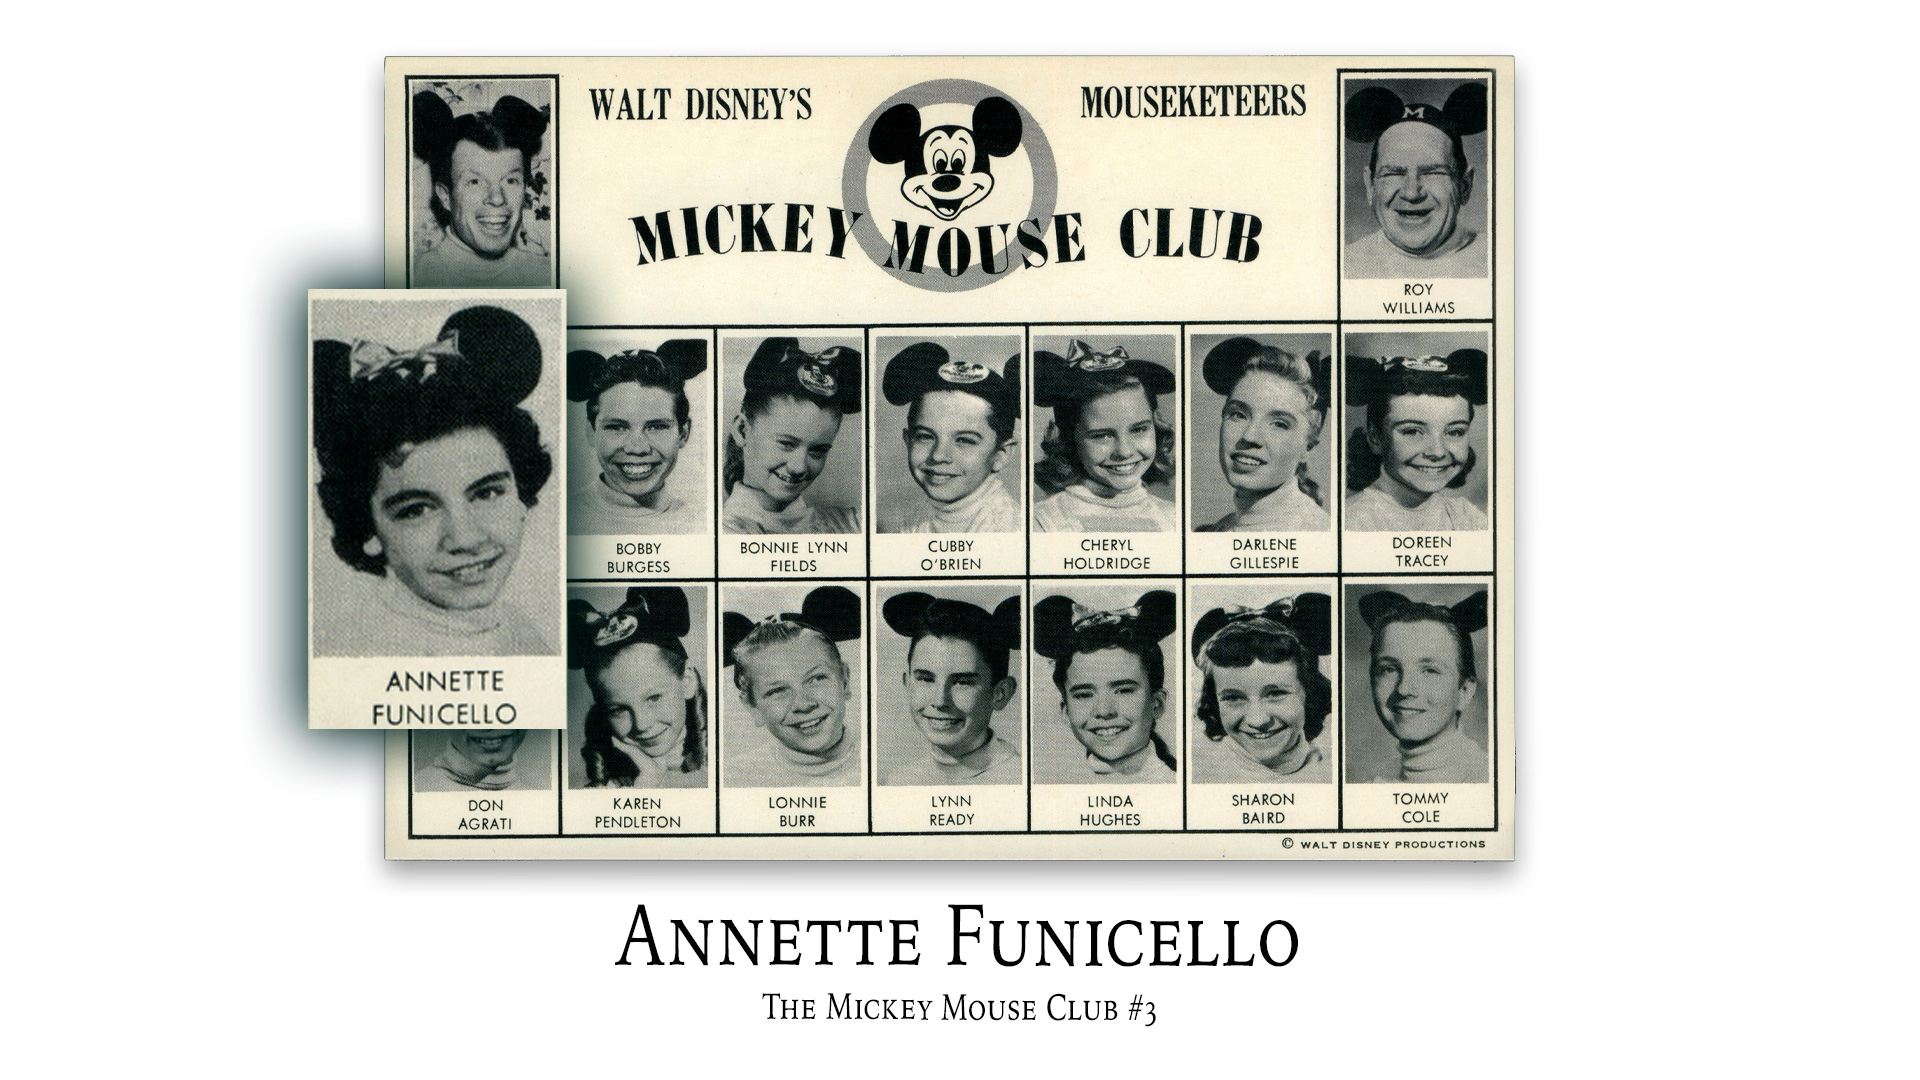 Annette Funicello: The Mouseketeers, Part 3